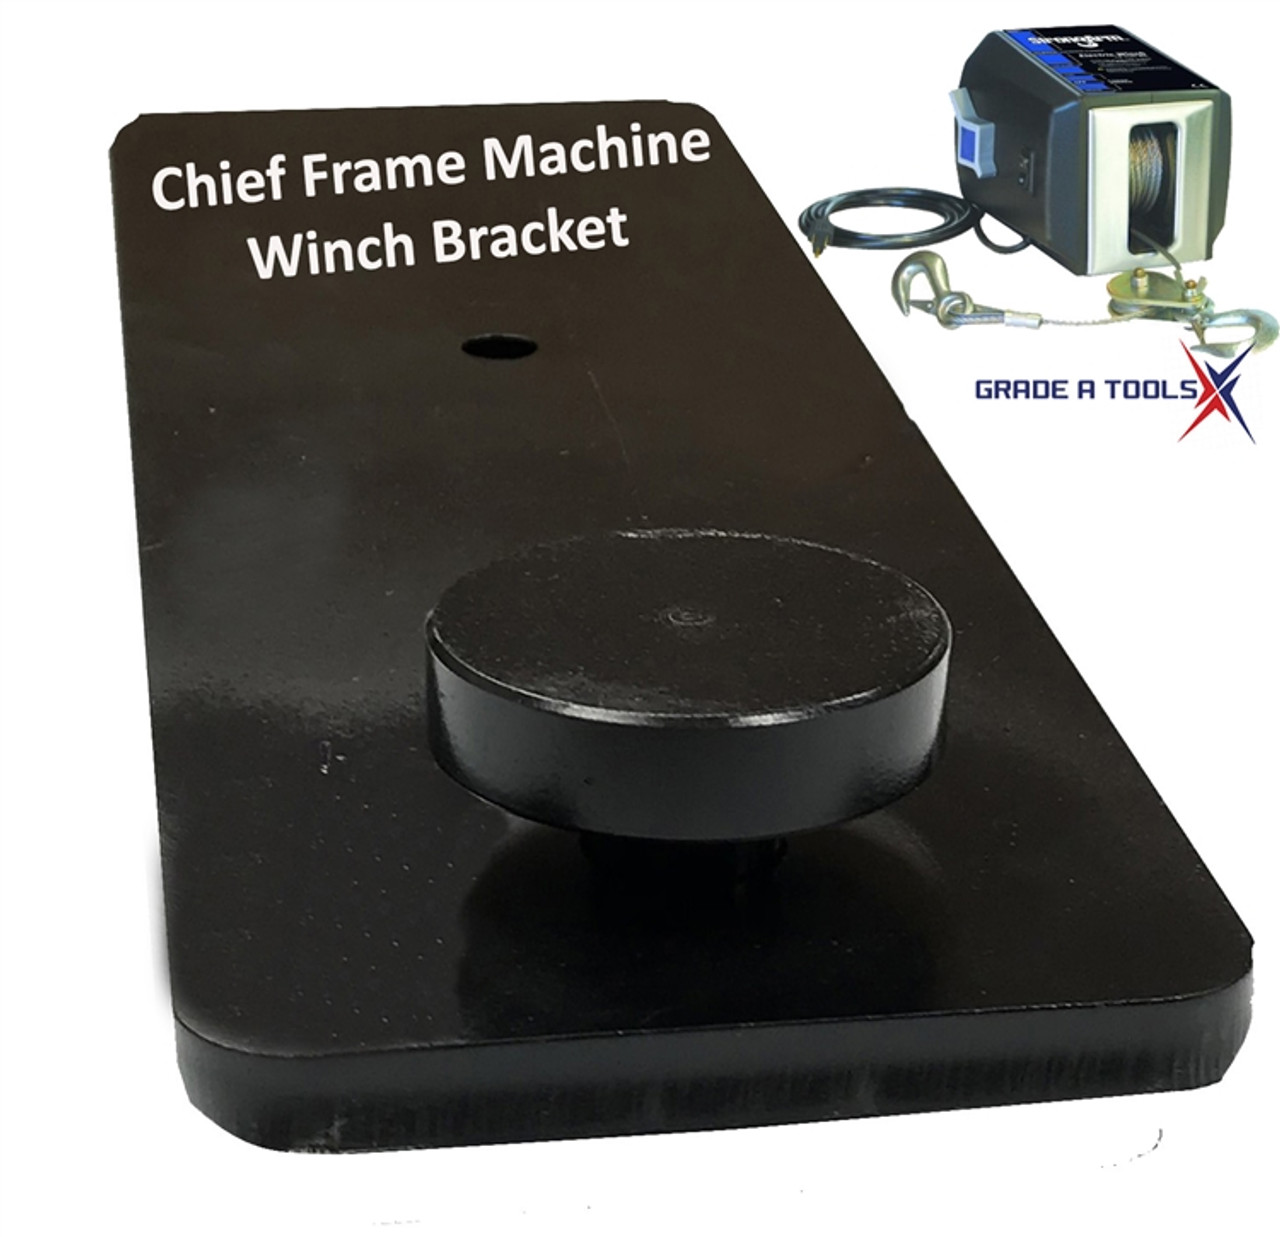 Replacement Winch Bracket for Chief Frame Machines